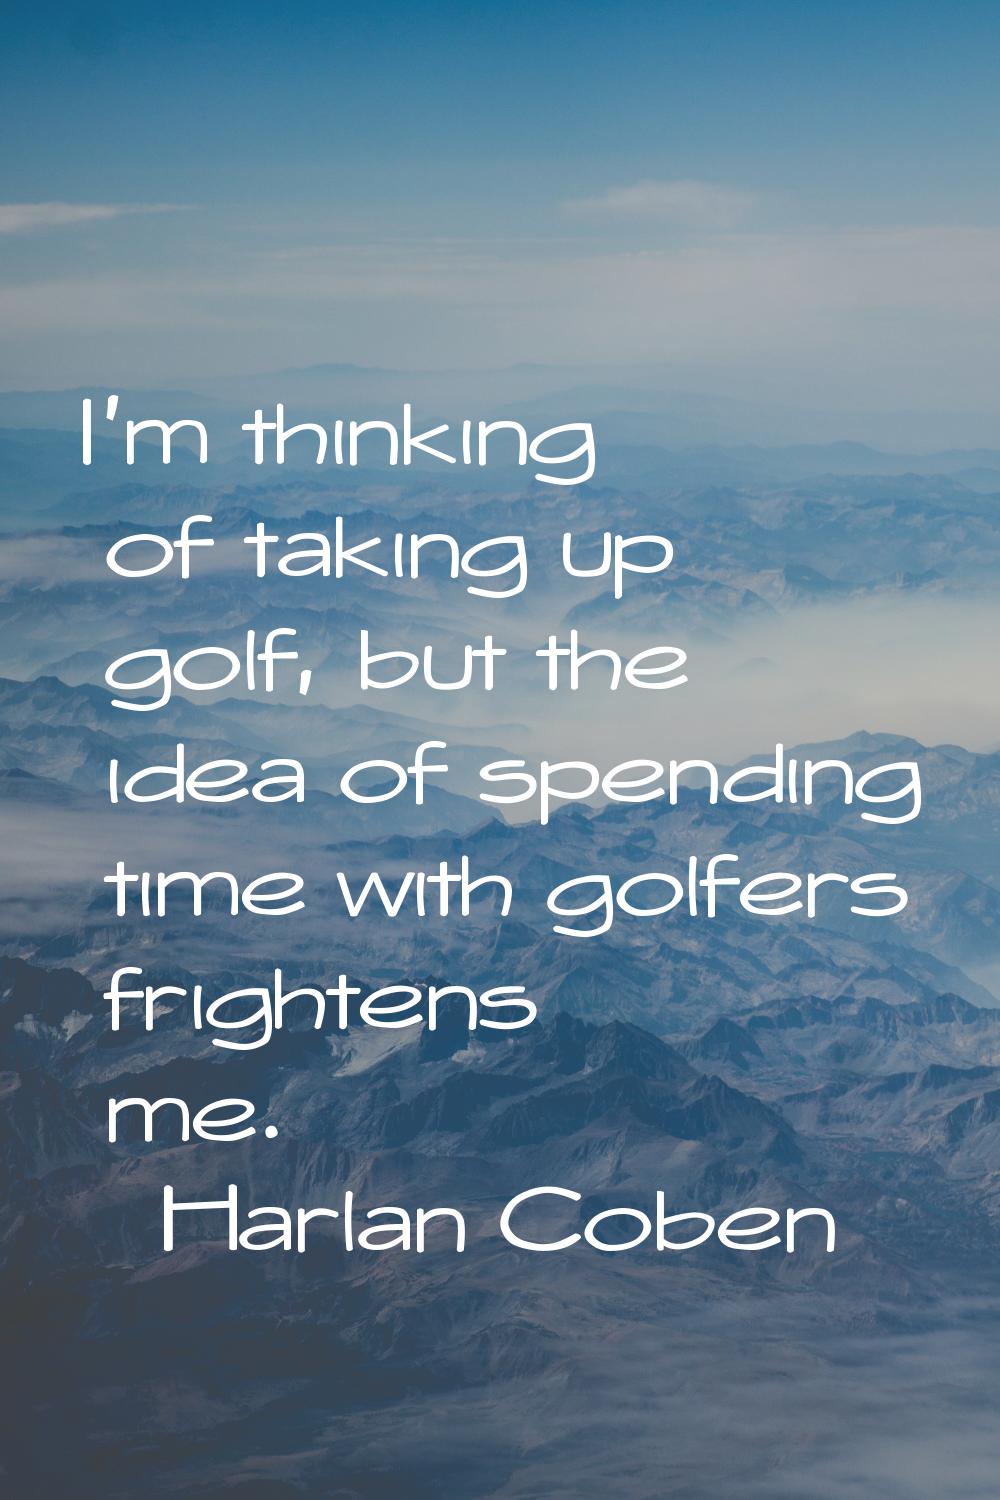 I'm thinking of taking up golf, but the idea of spending time with golfers frightens me.